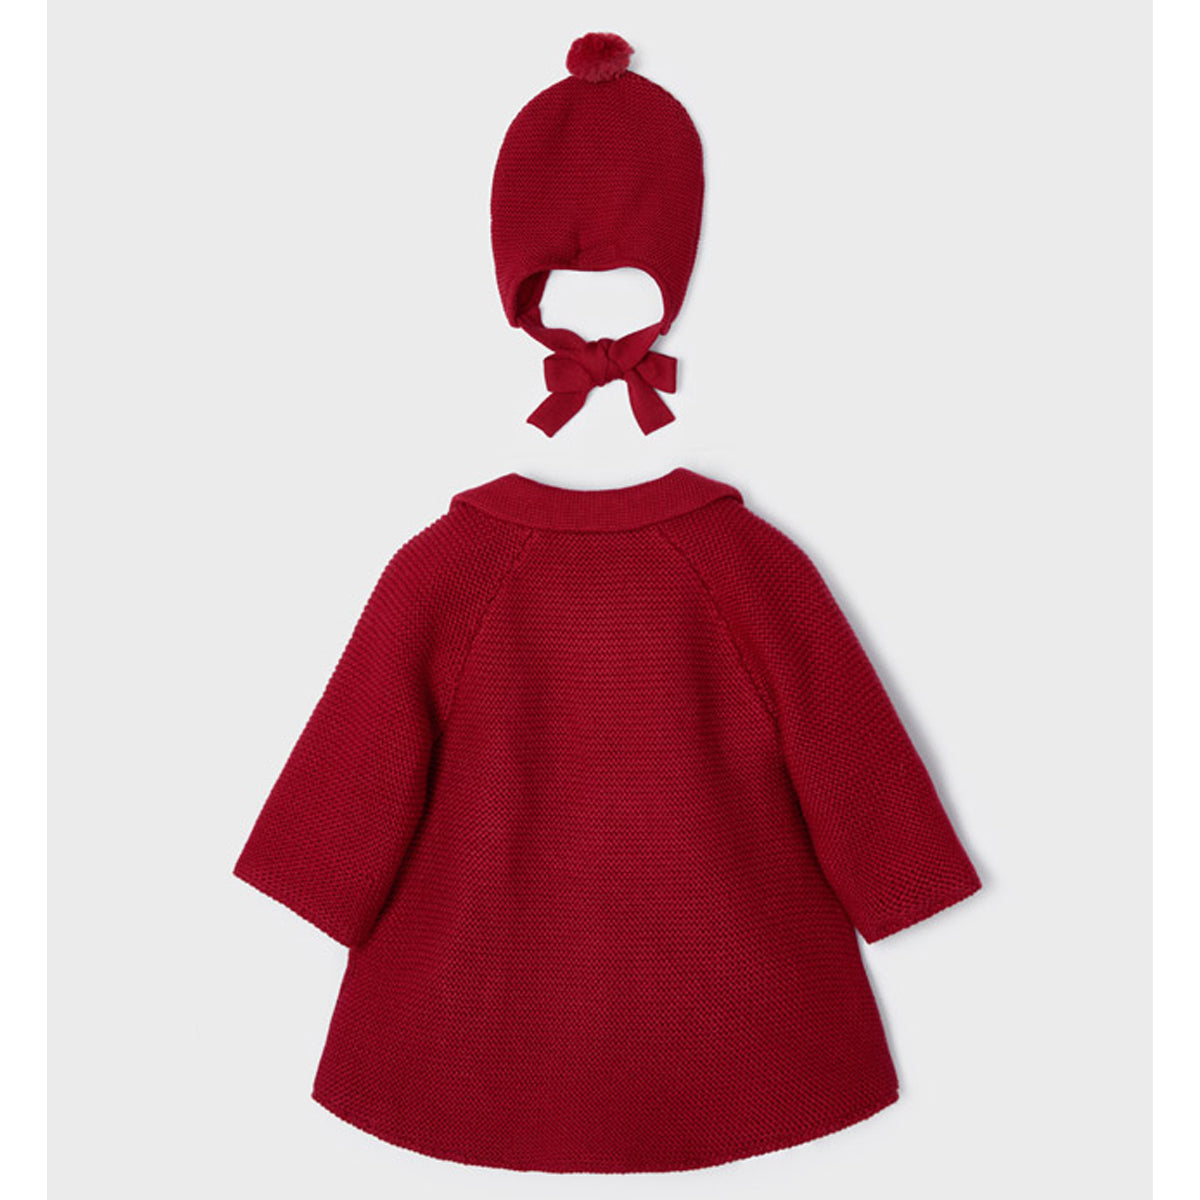 Red Knit Coat With Hat